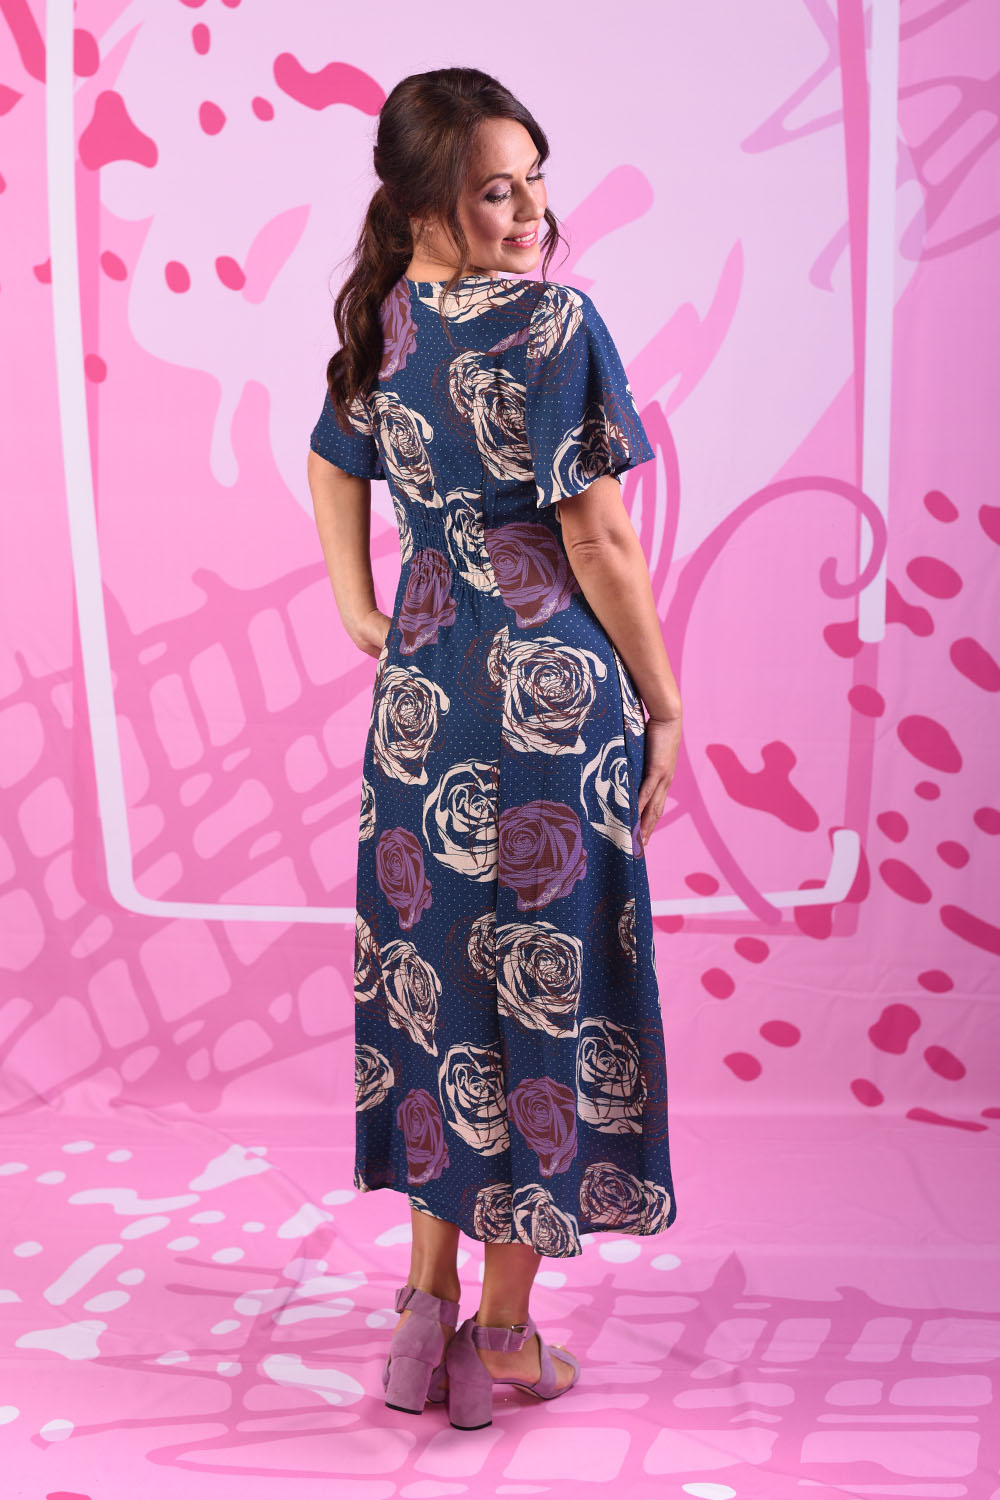 Model wearing navy floral dress by Annah Stretton